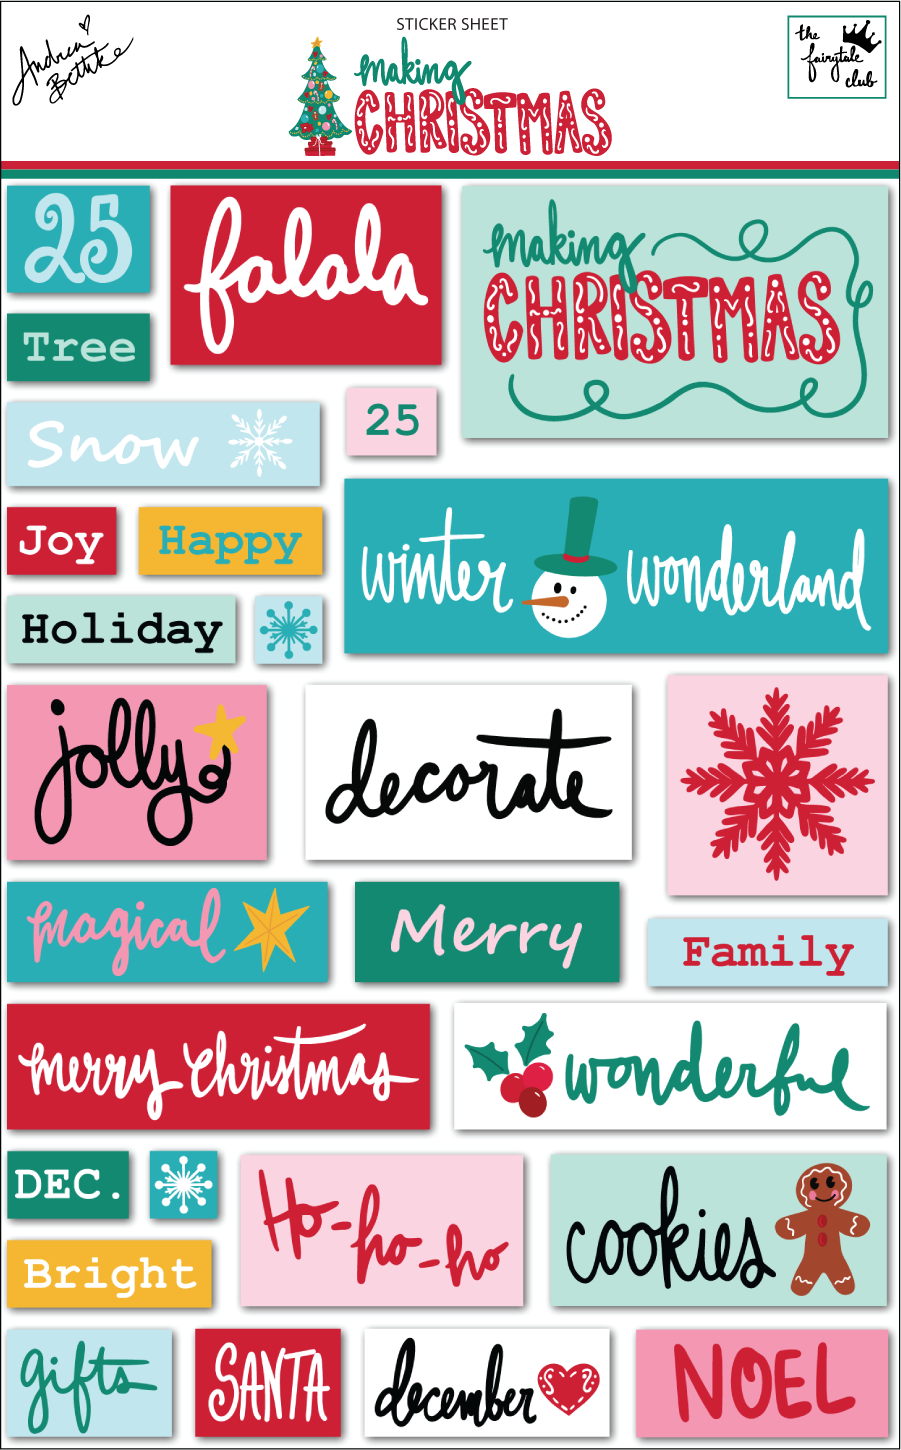 Making Christmas - Stickers with packaging-07.png